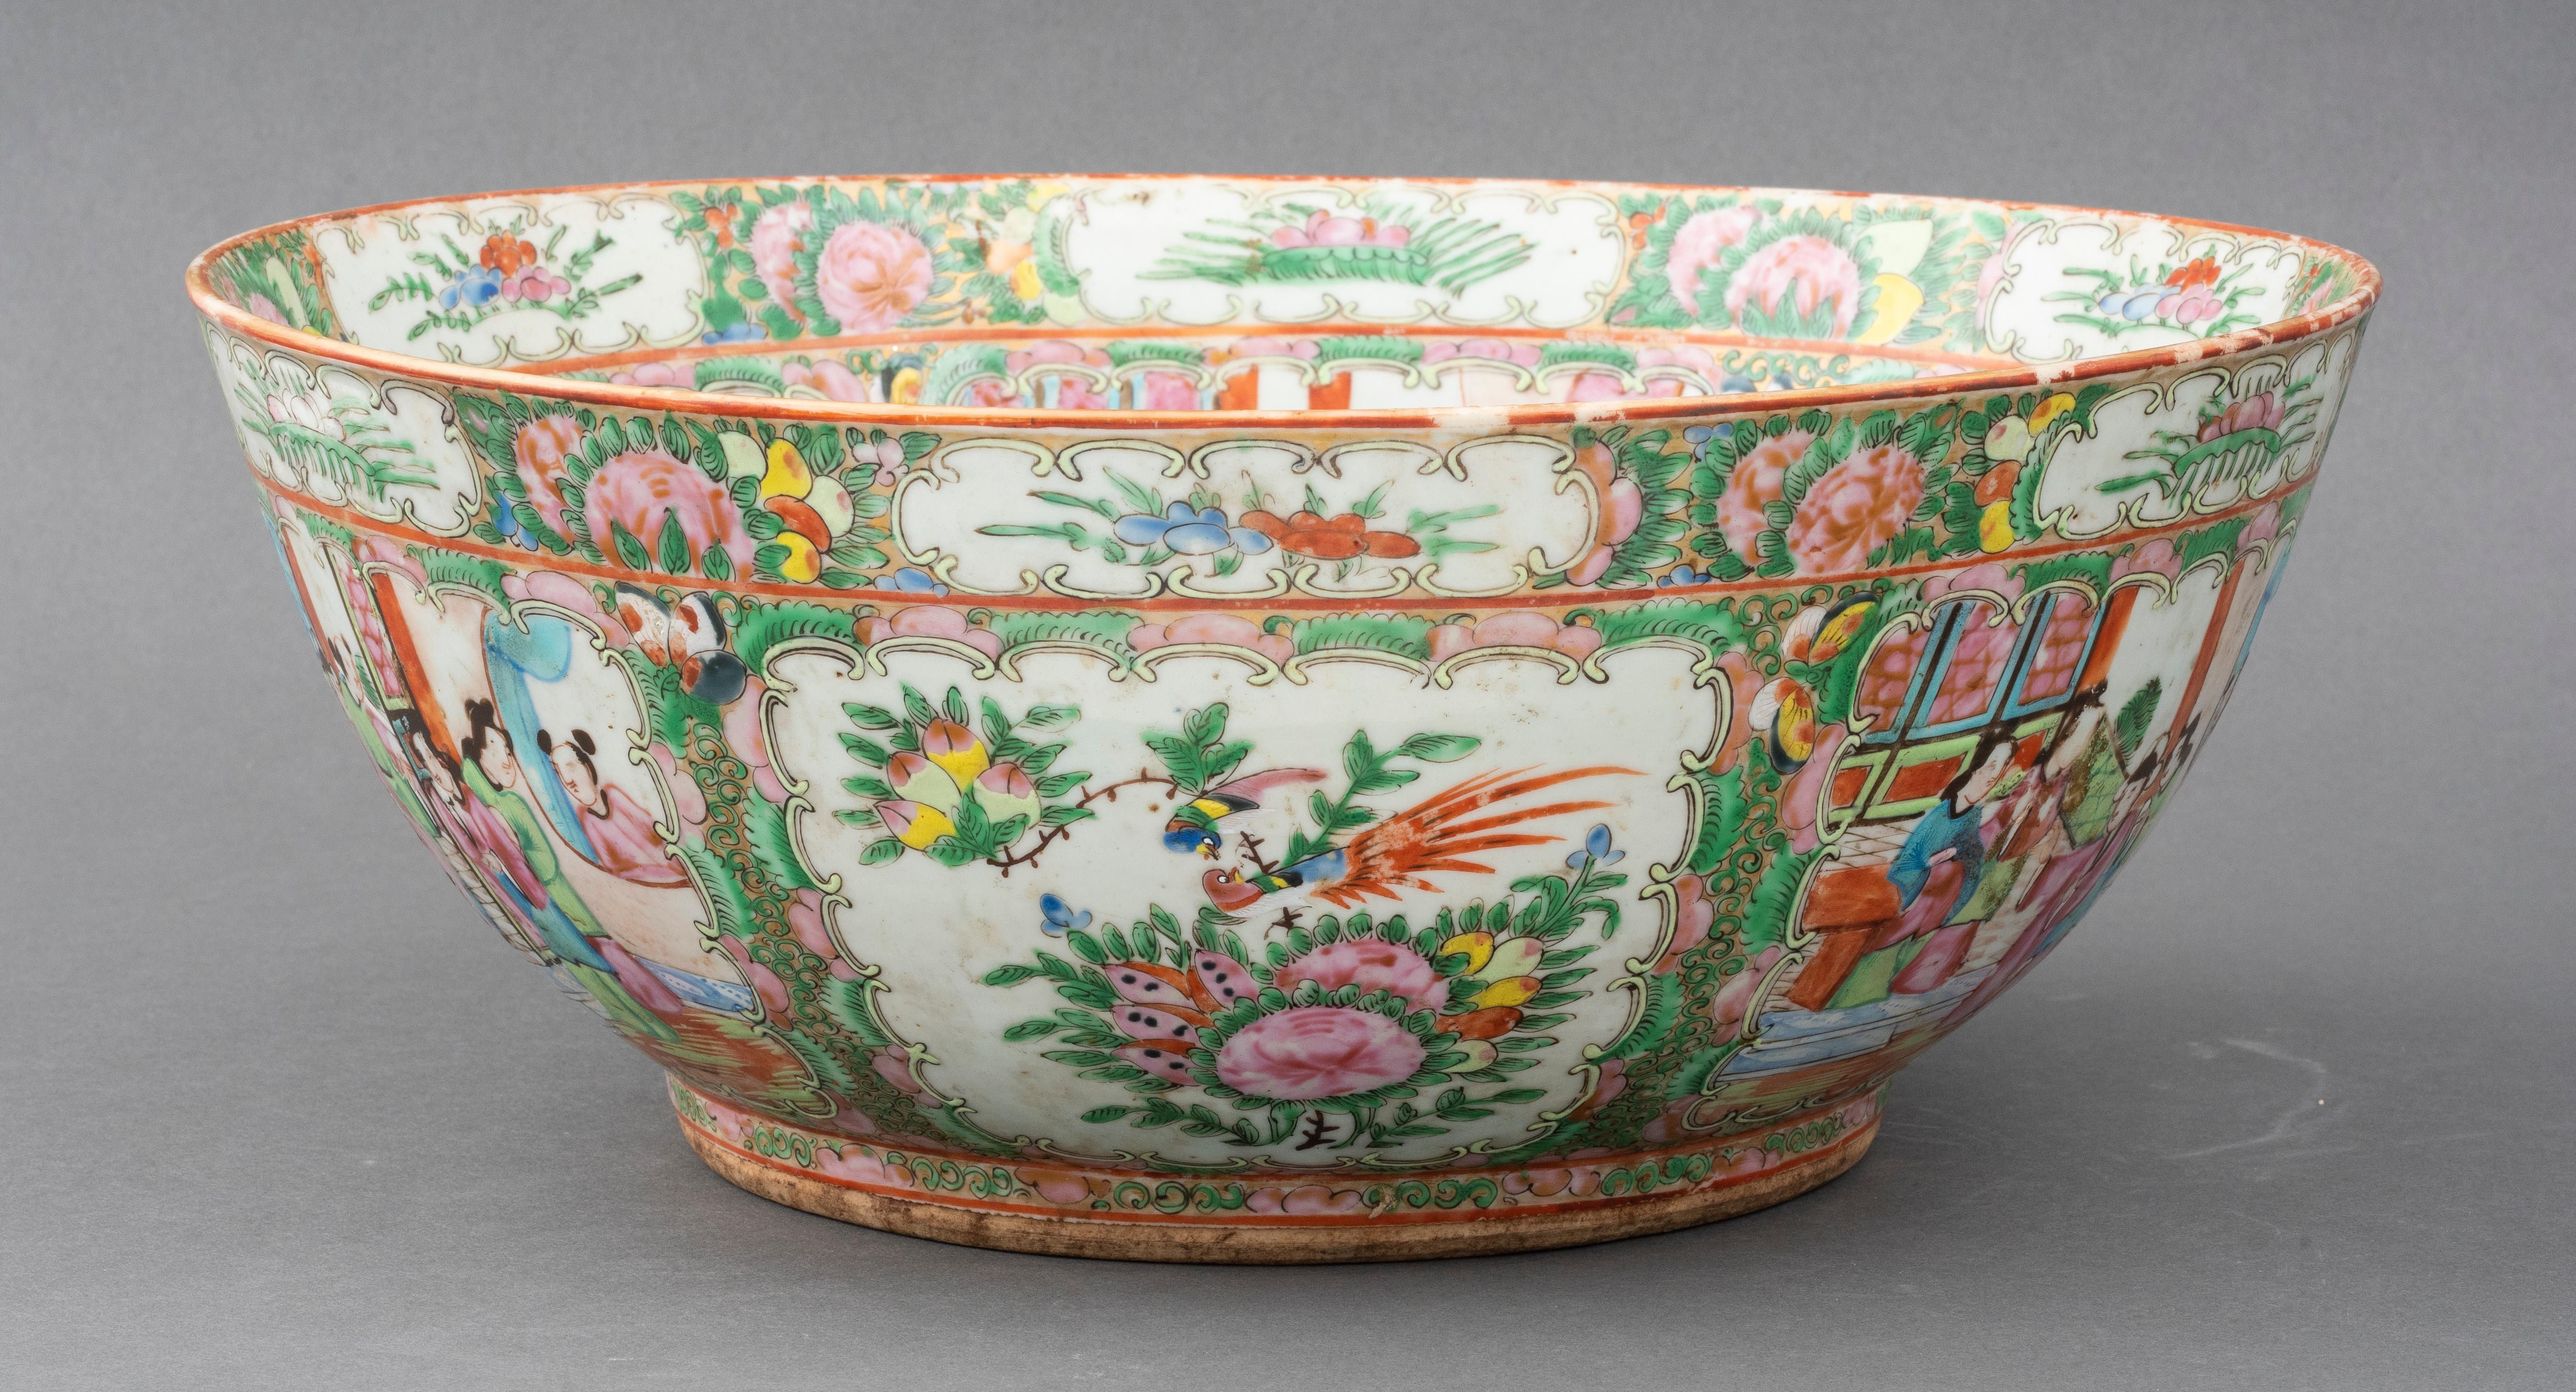 Large Chinese rose medallion punch bowl, nicely painted with good detail, Chinese export of the late 19th century. 6